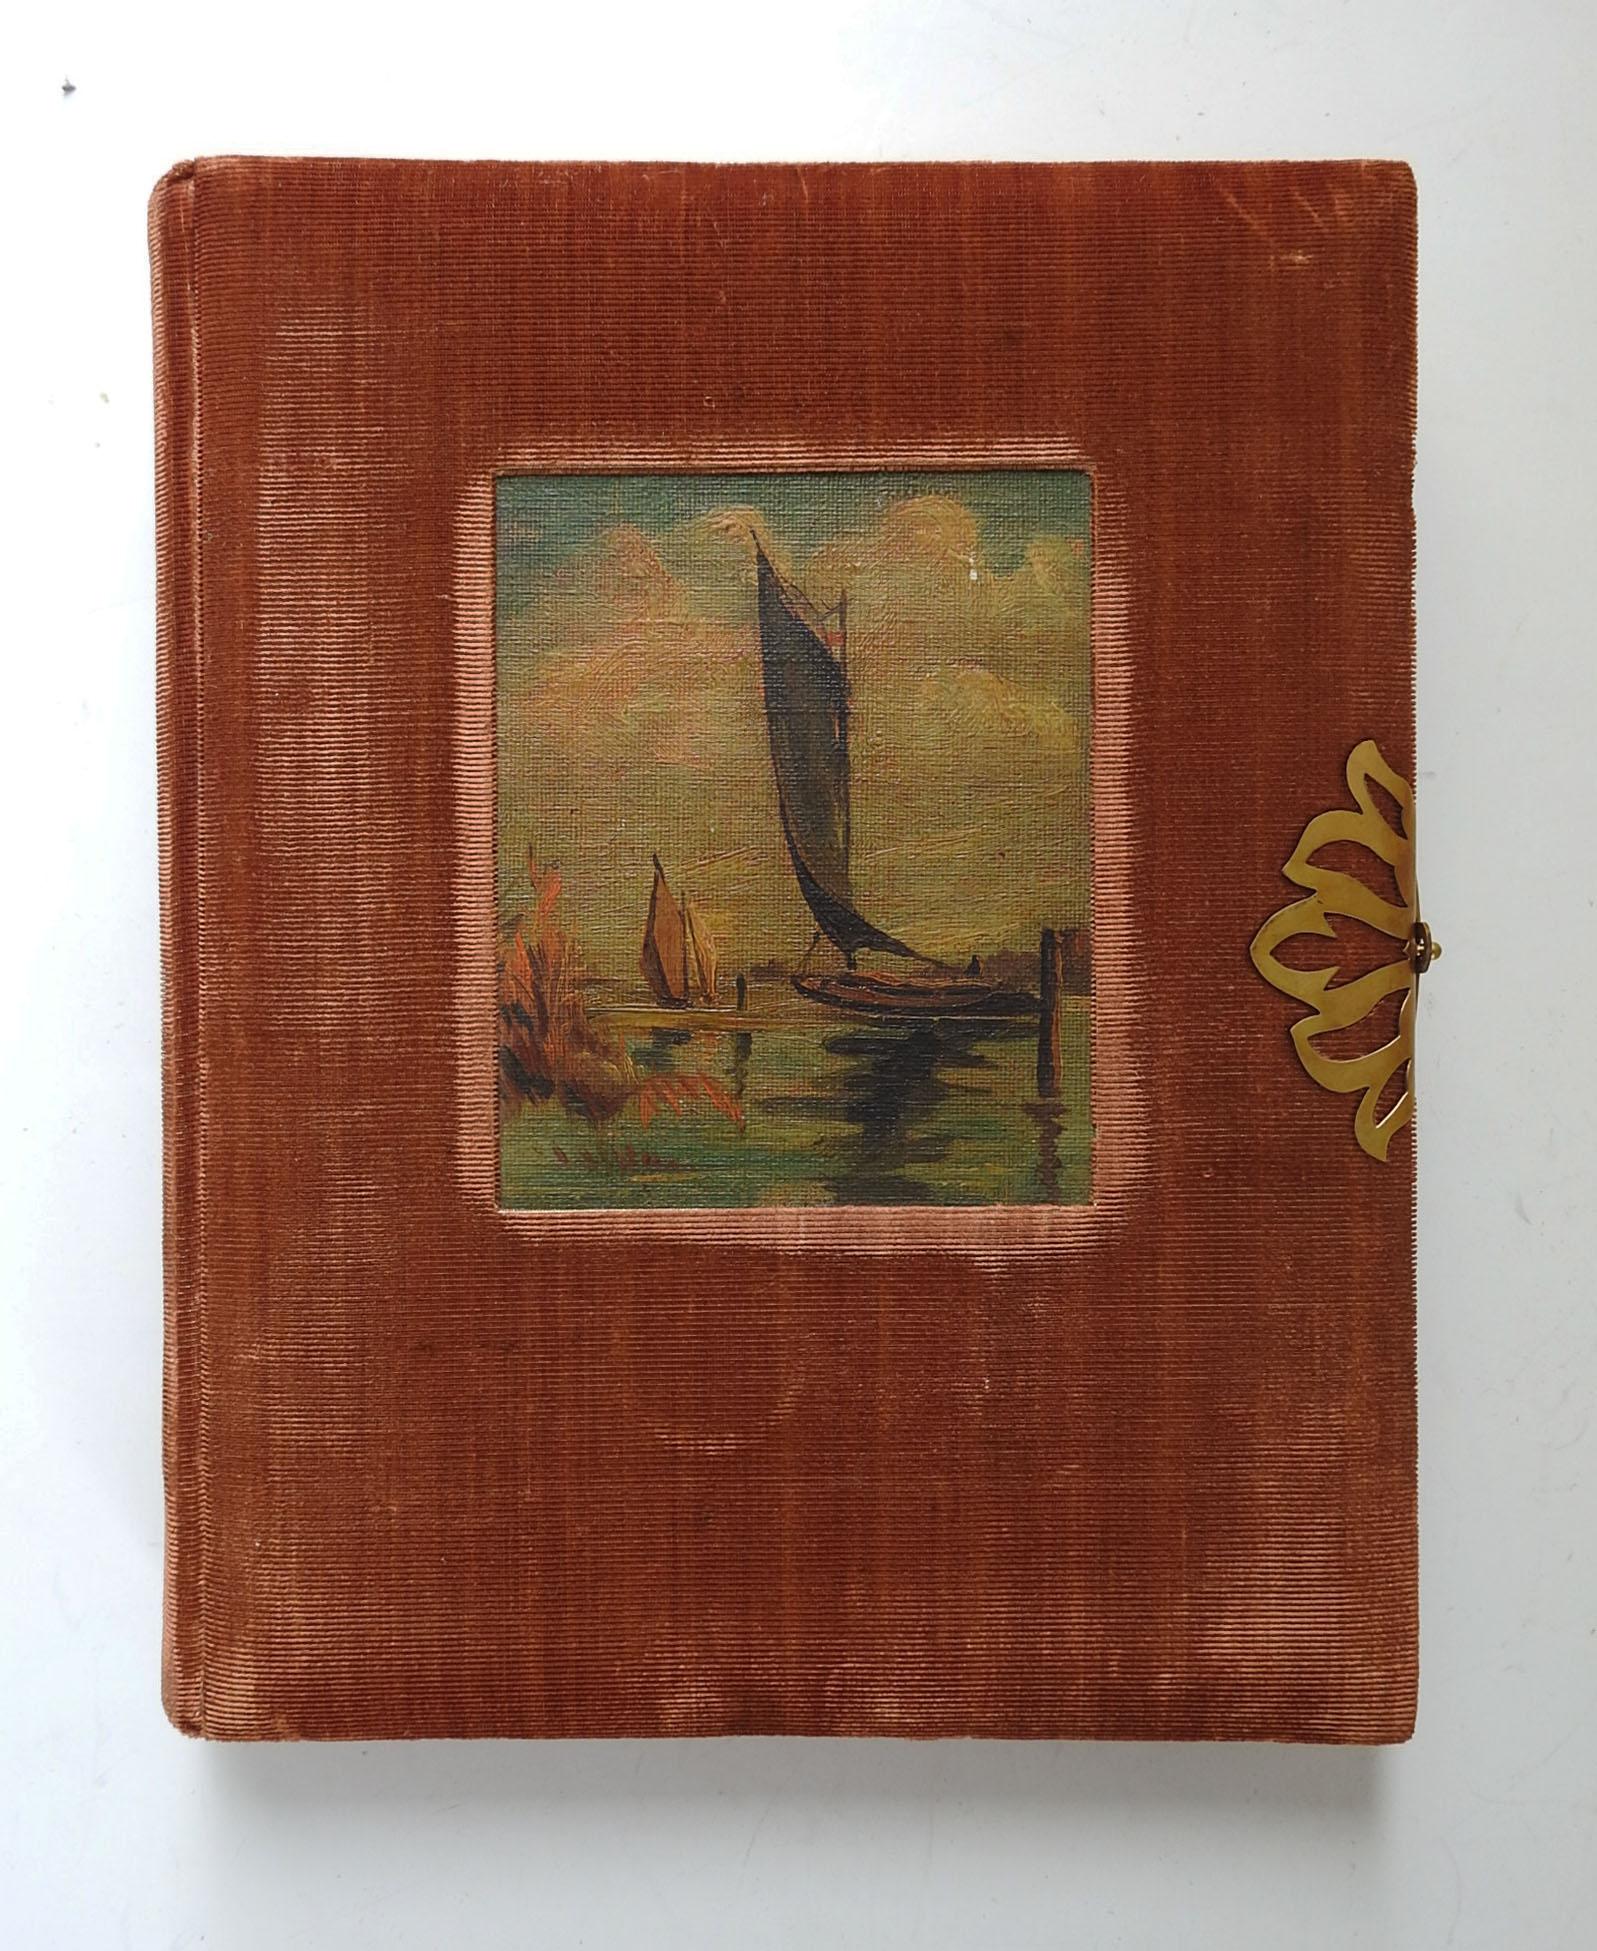 Circa 1920's velvet photo album, never used.  Covered in rust velvet with oil on canvas board painting of sail boats inlaid on cover.  Interior is .25